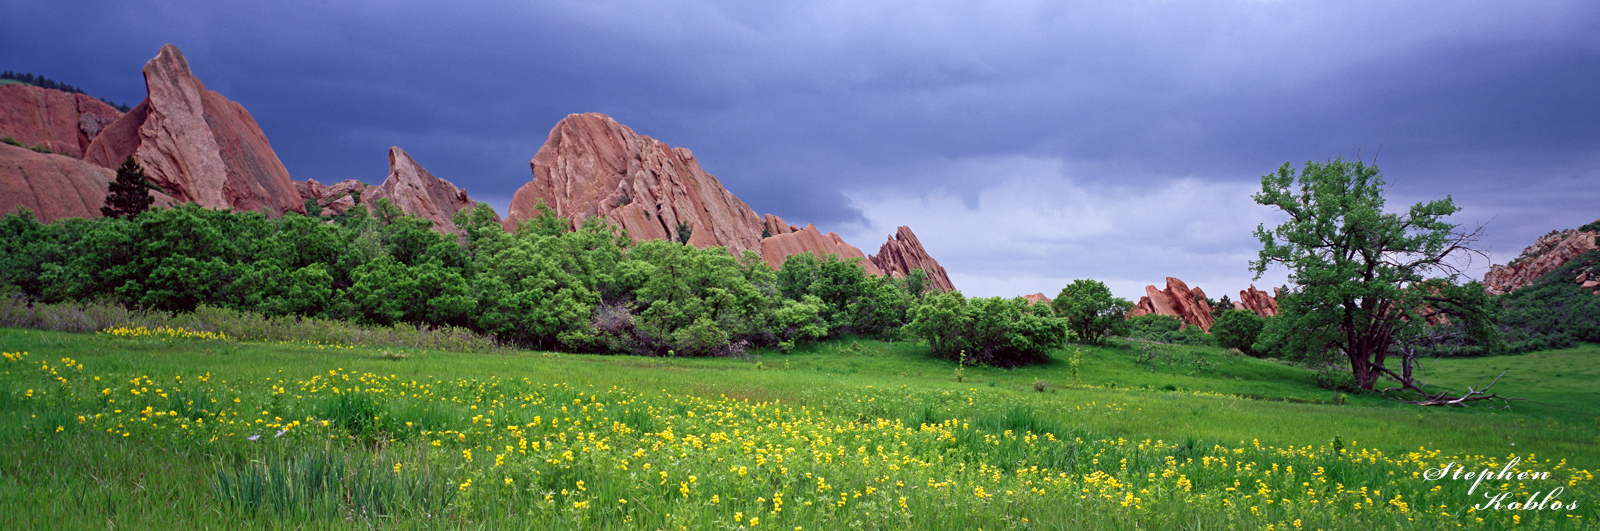 Storm over Roxborough  Limited Edition of 250